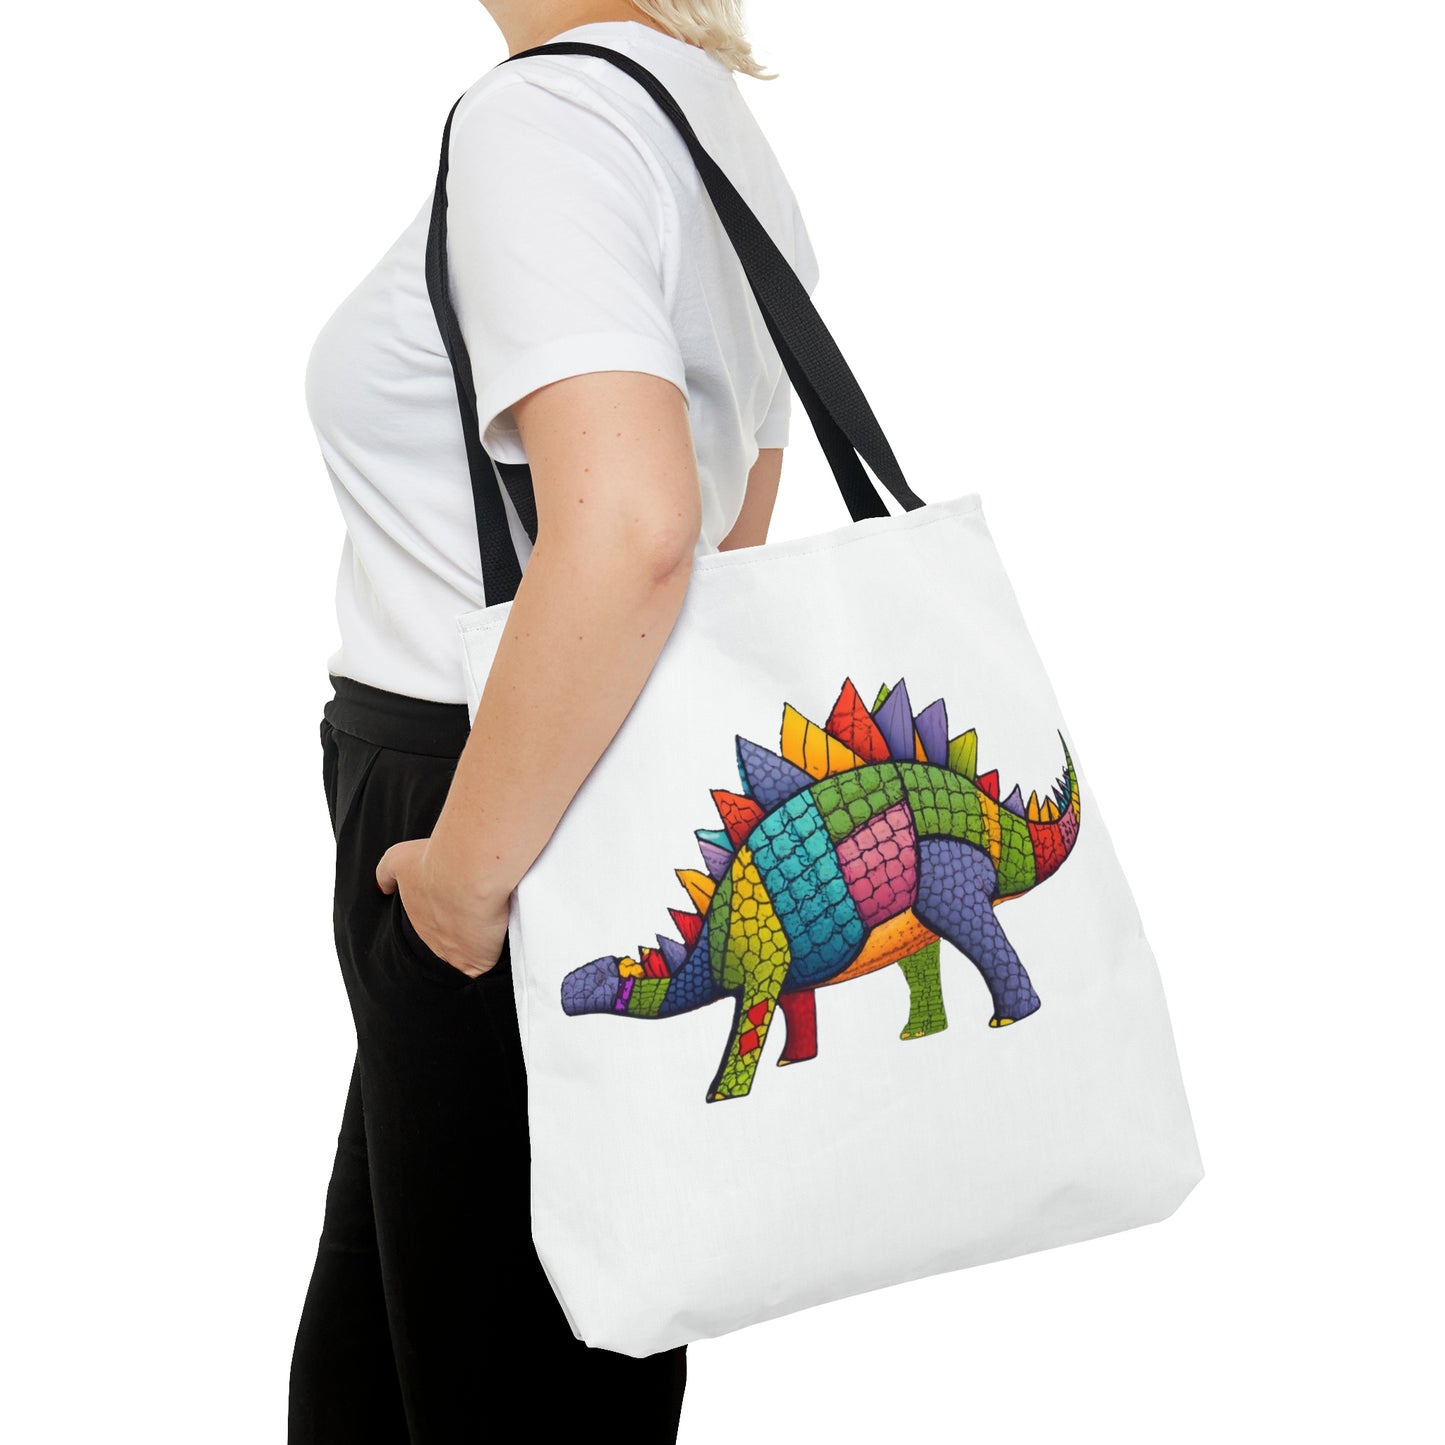 Sewn Scales: Patchwork Stegosaurus Delight Tote Bag